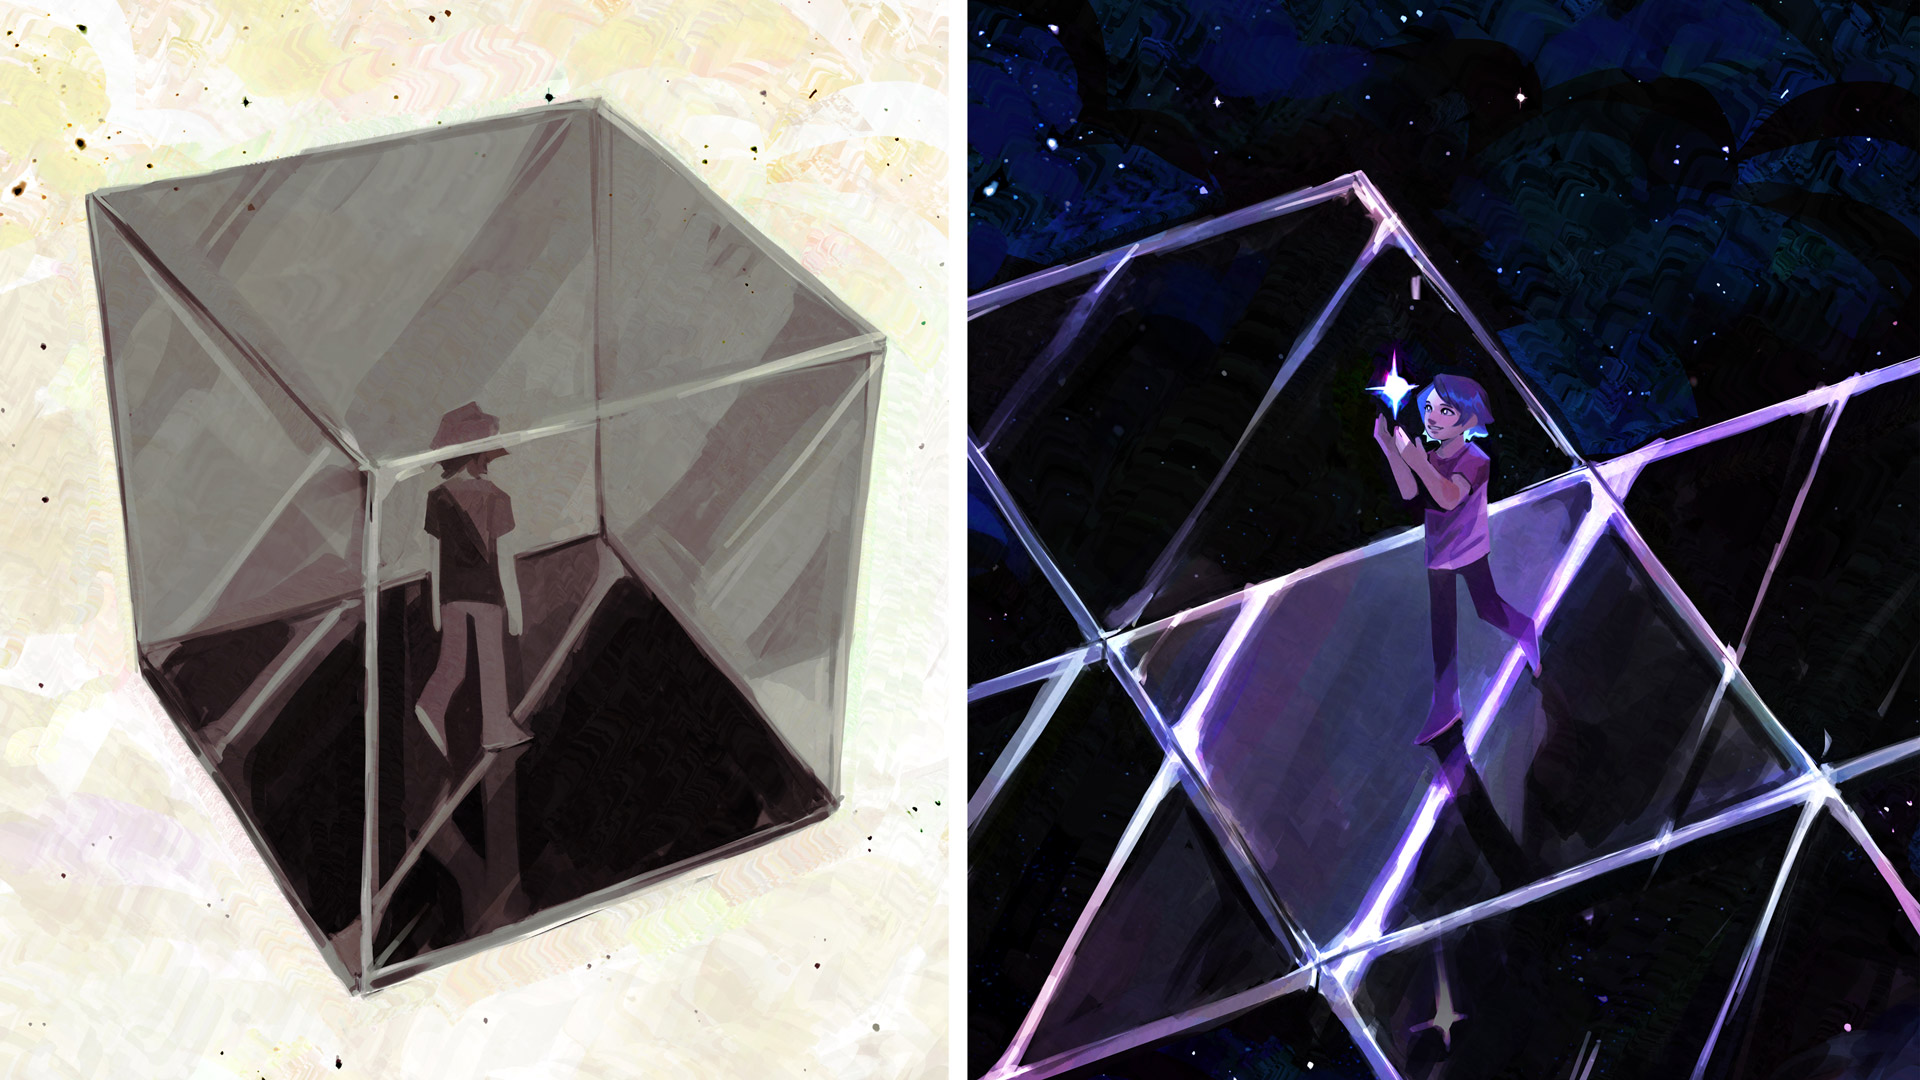 Two illustrations side by side. The first is of a person in a see-through cube, they are turned away from the viewer. The second is of the same person holding a star and standing on a splayed out version of the cube. That background shows a starry sky.